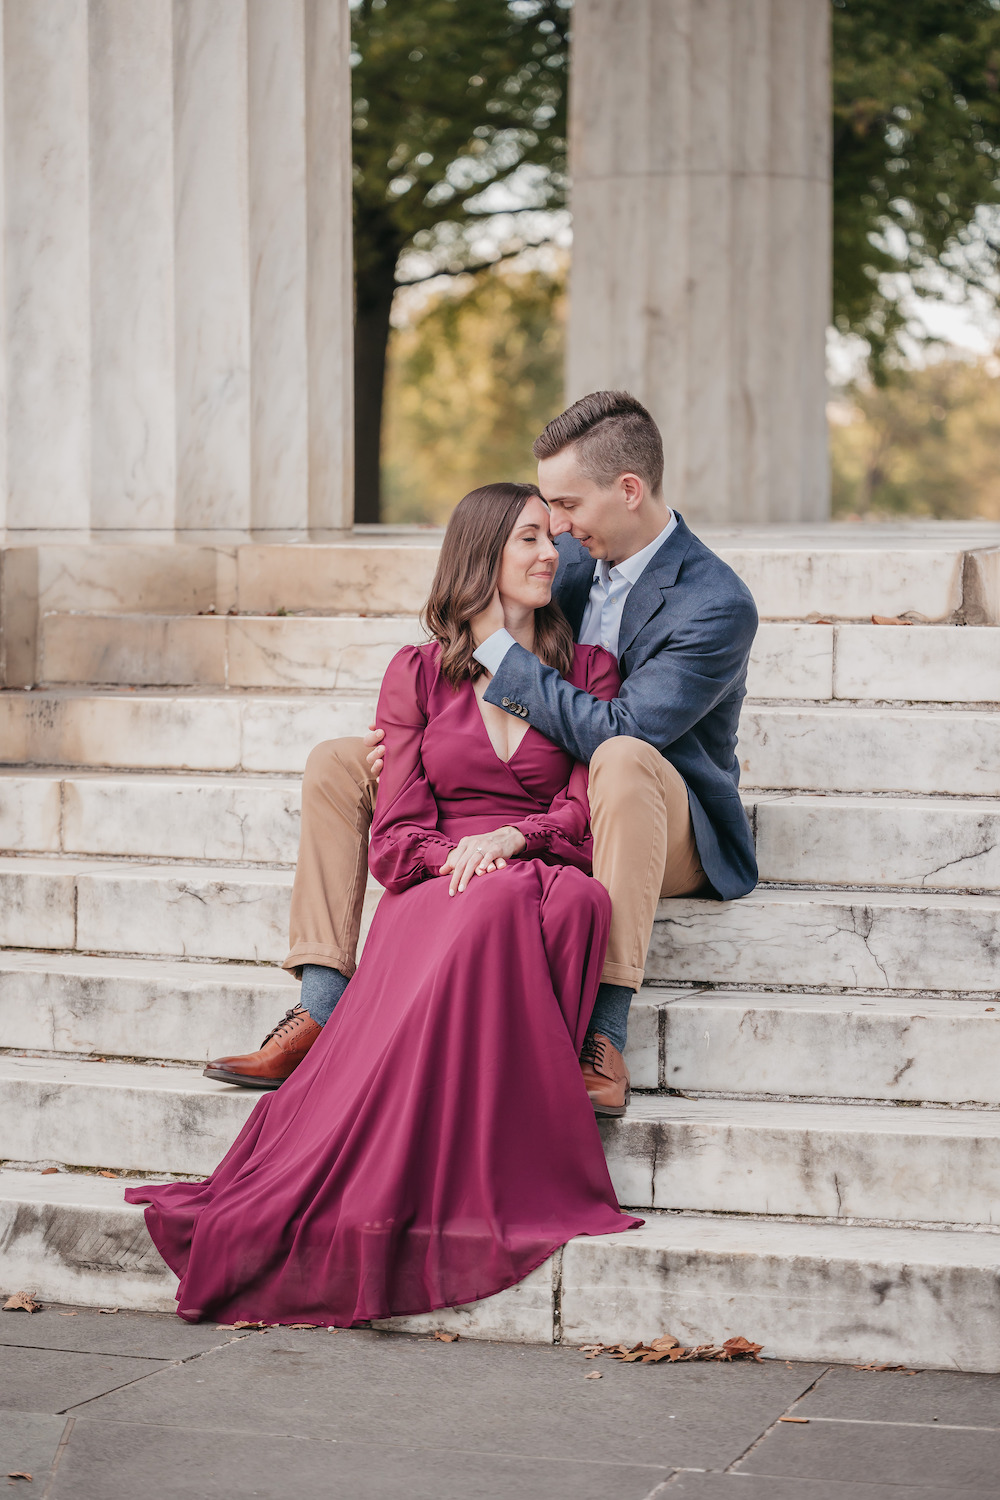 Couple sitting together on the steps during their Washington DC engagement shoot with Rachel Yearick Photography